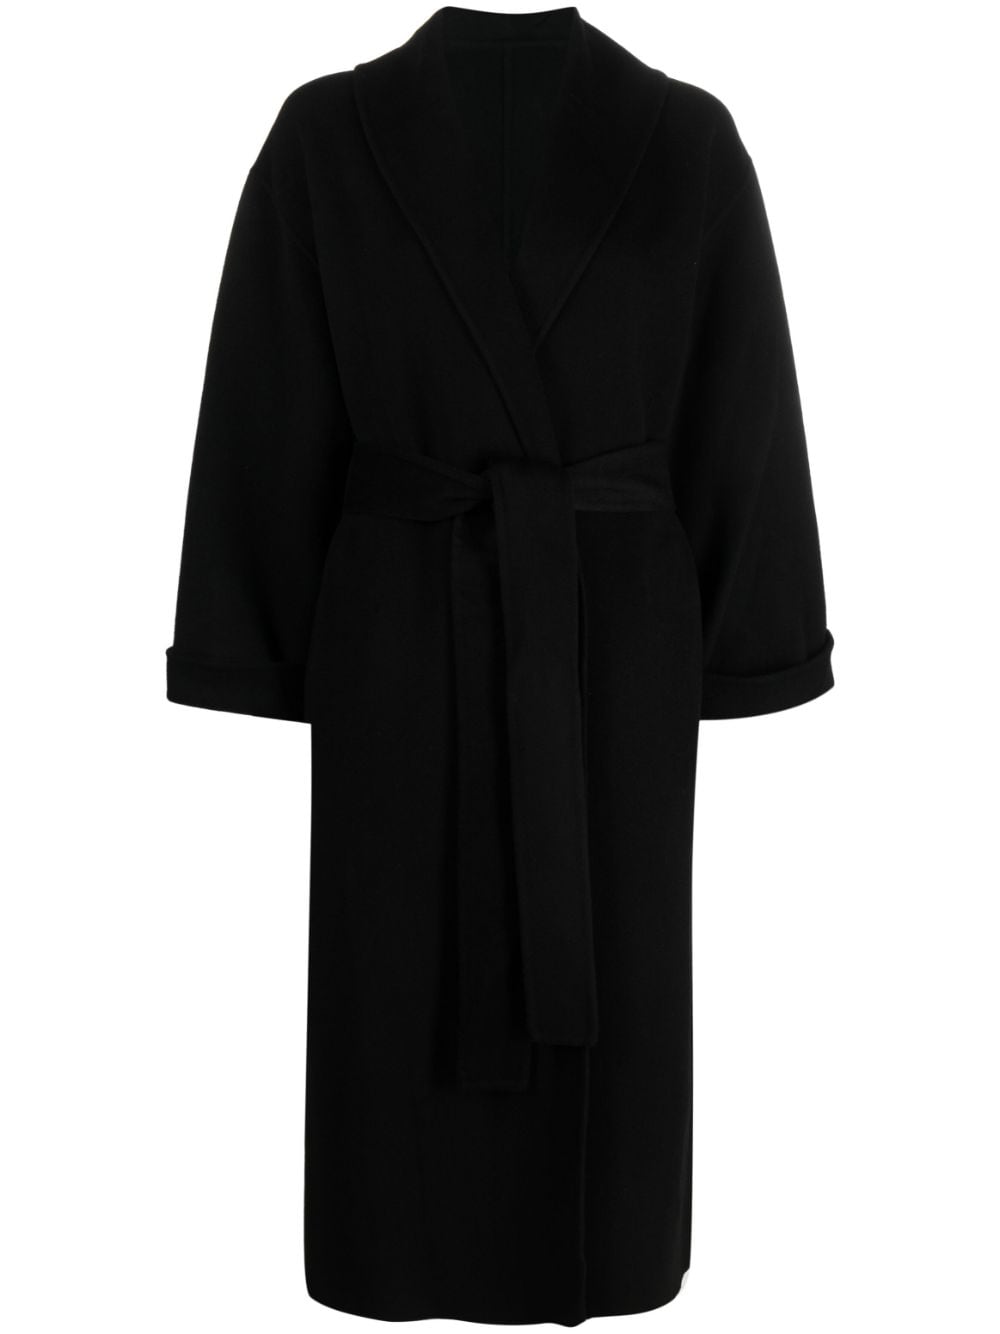 BY MALENE BIRGER BELTED WOOL TRENCH COAT